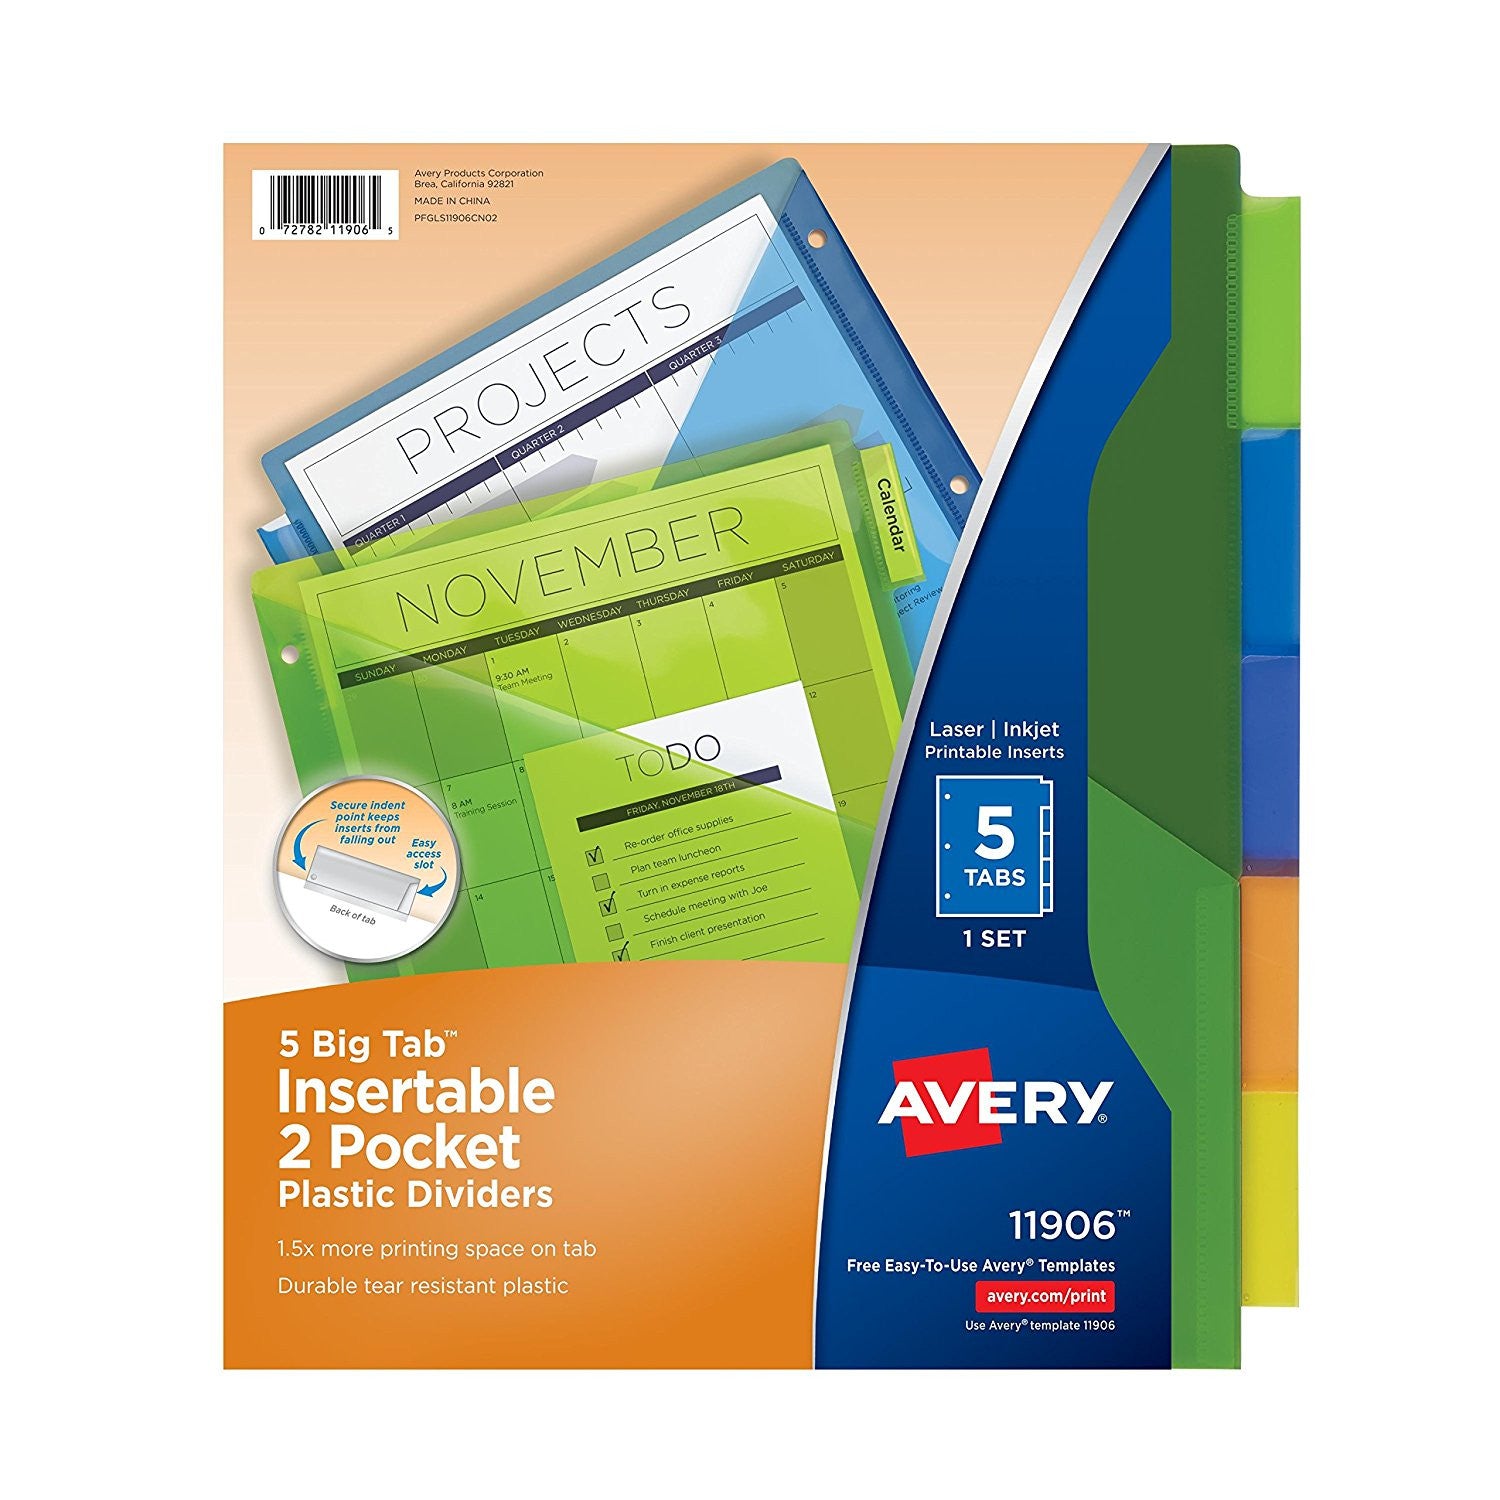 Avery®5 Big Tab Two-Pocket Insertable Dividers, Poly, Assorted-Colors (11906)